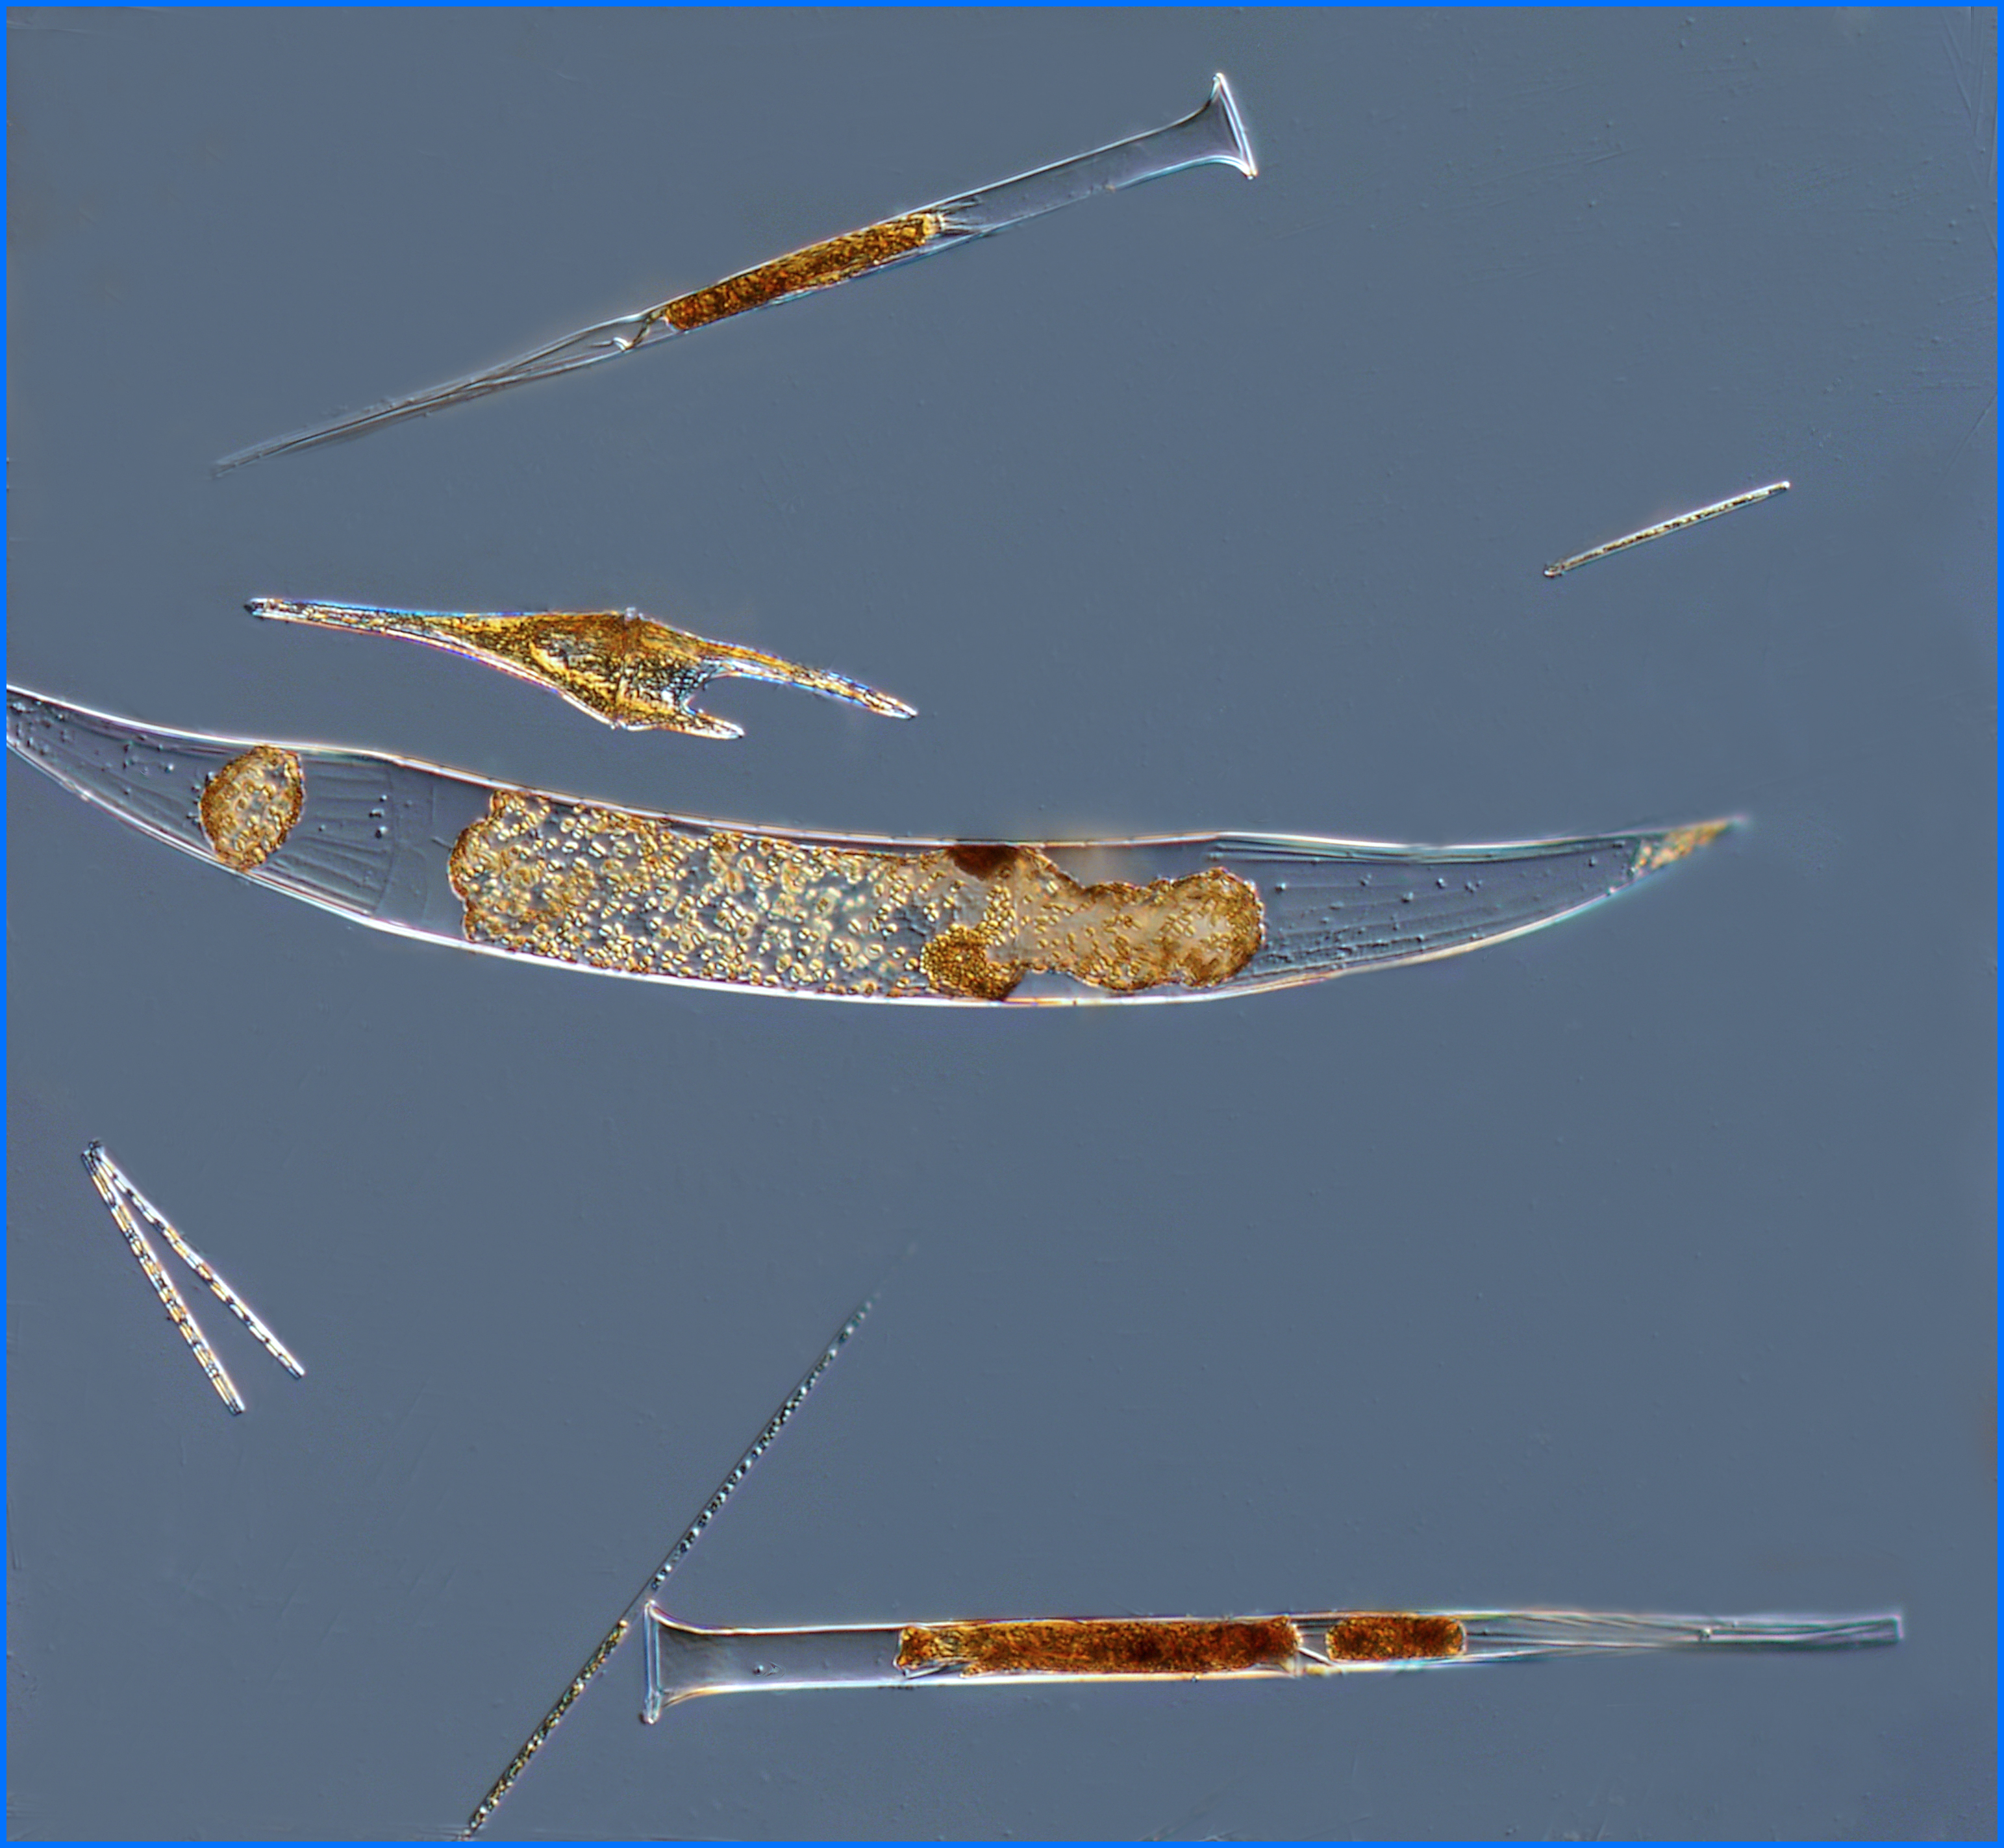 Plankton net tow (50 µm) material imaged using a 10x objective